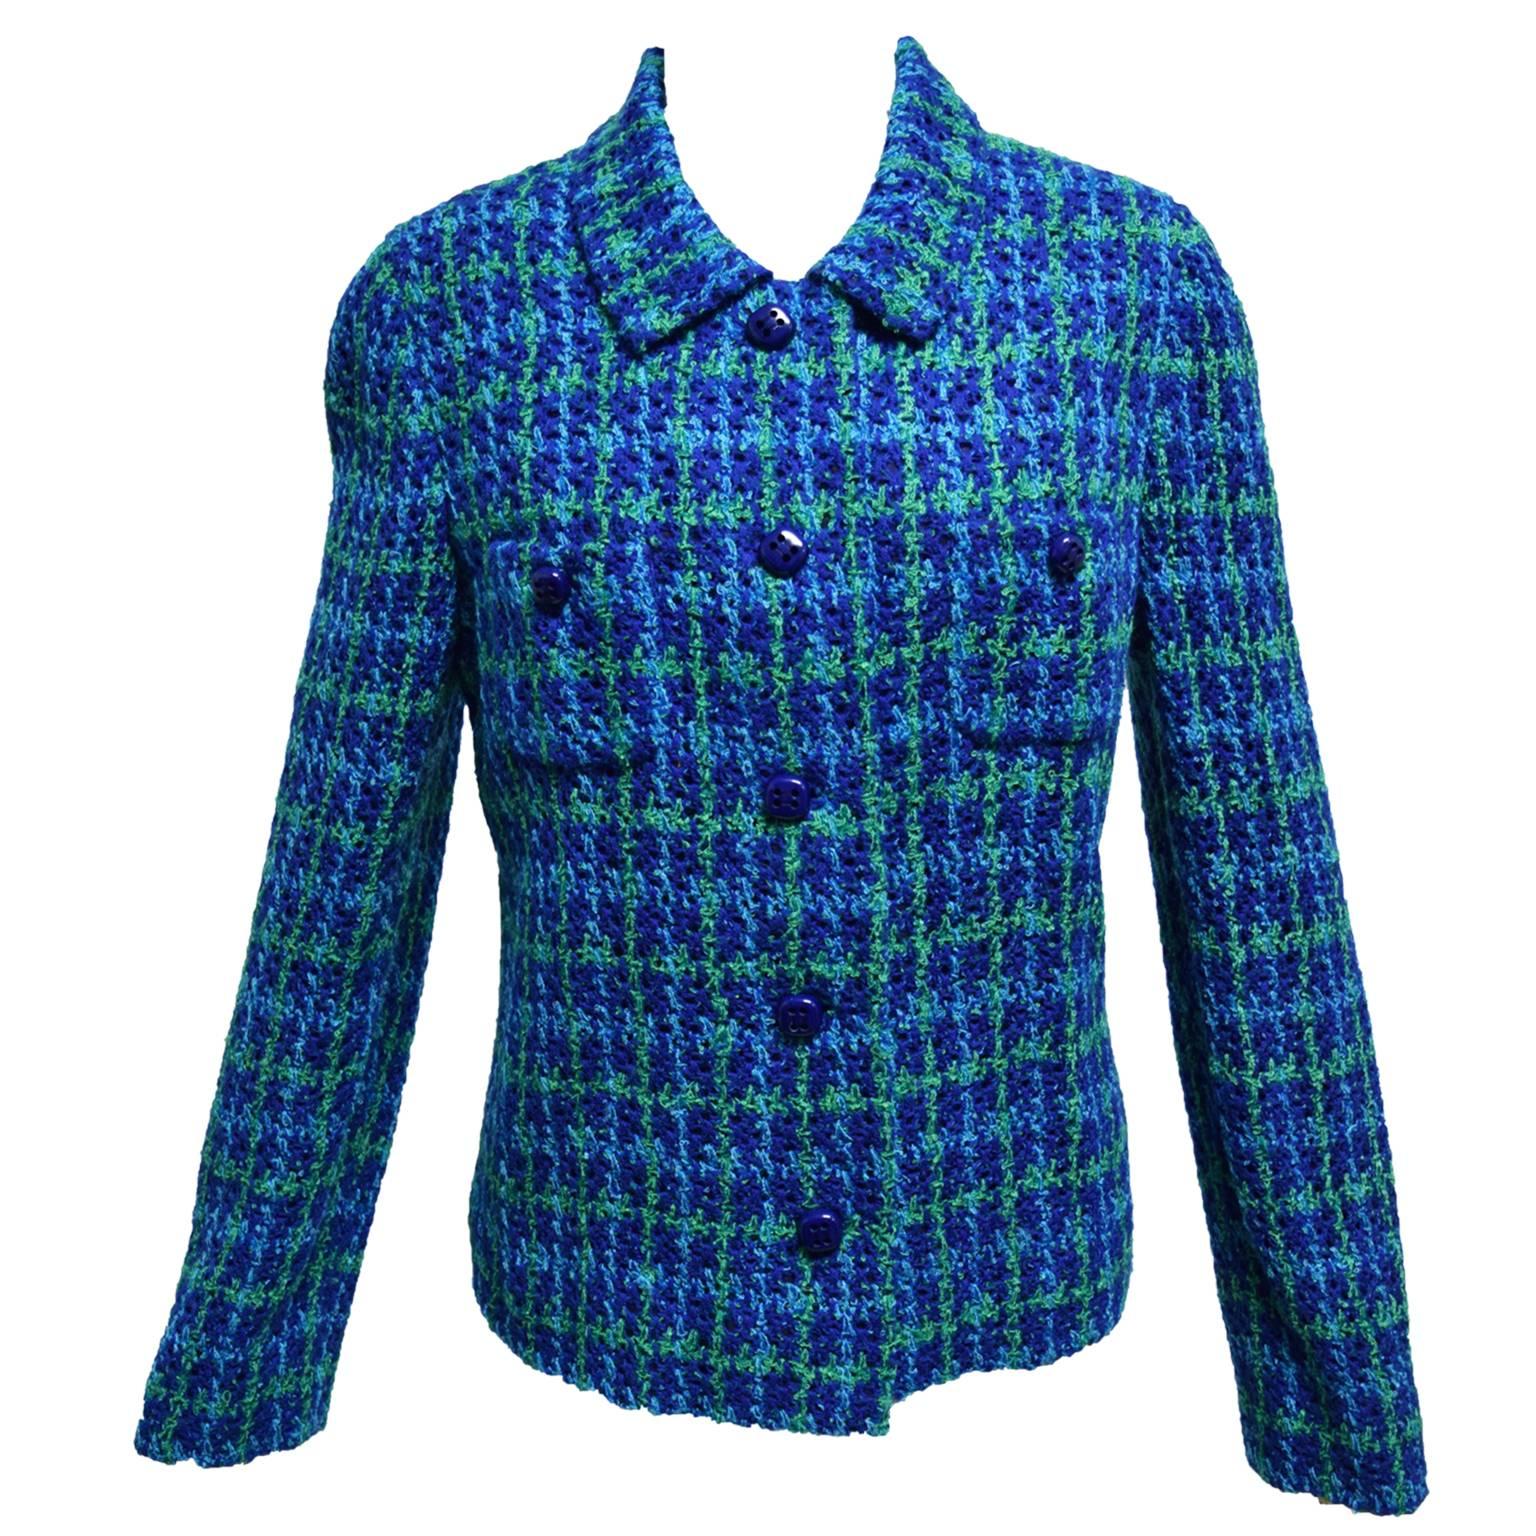 Murell Blue, Navy, and Green Crocheted Jacket and Dress Ensemble  In Excellent Condition For Sale In Henrico, VA